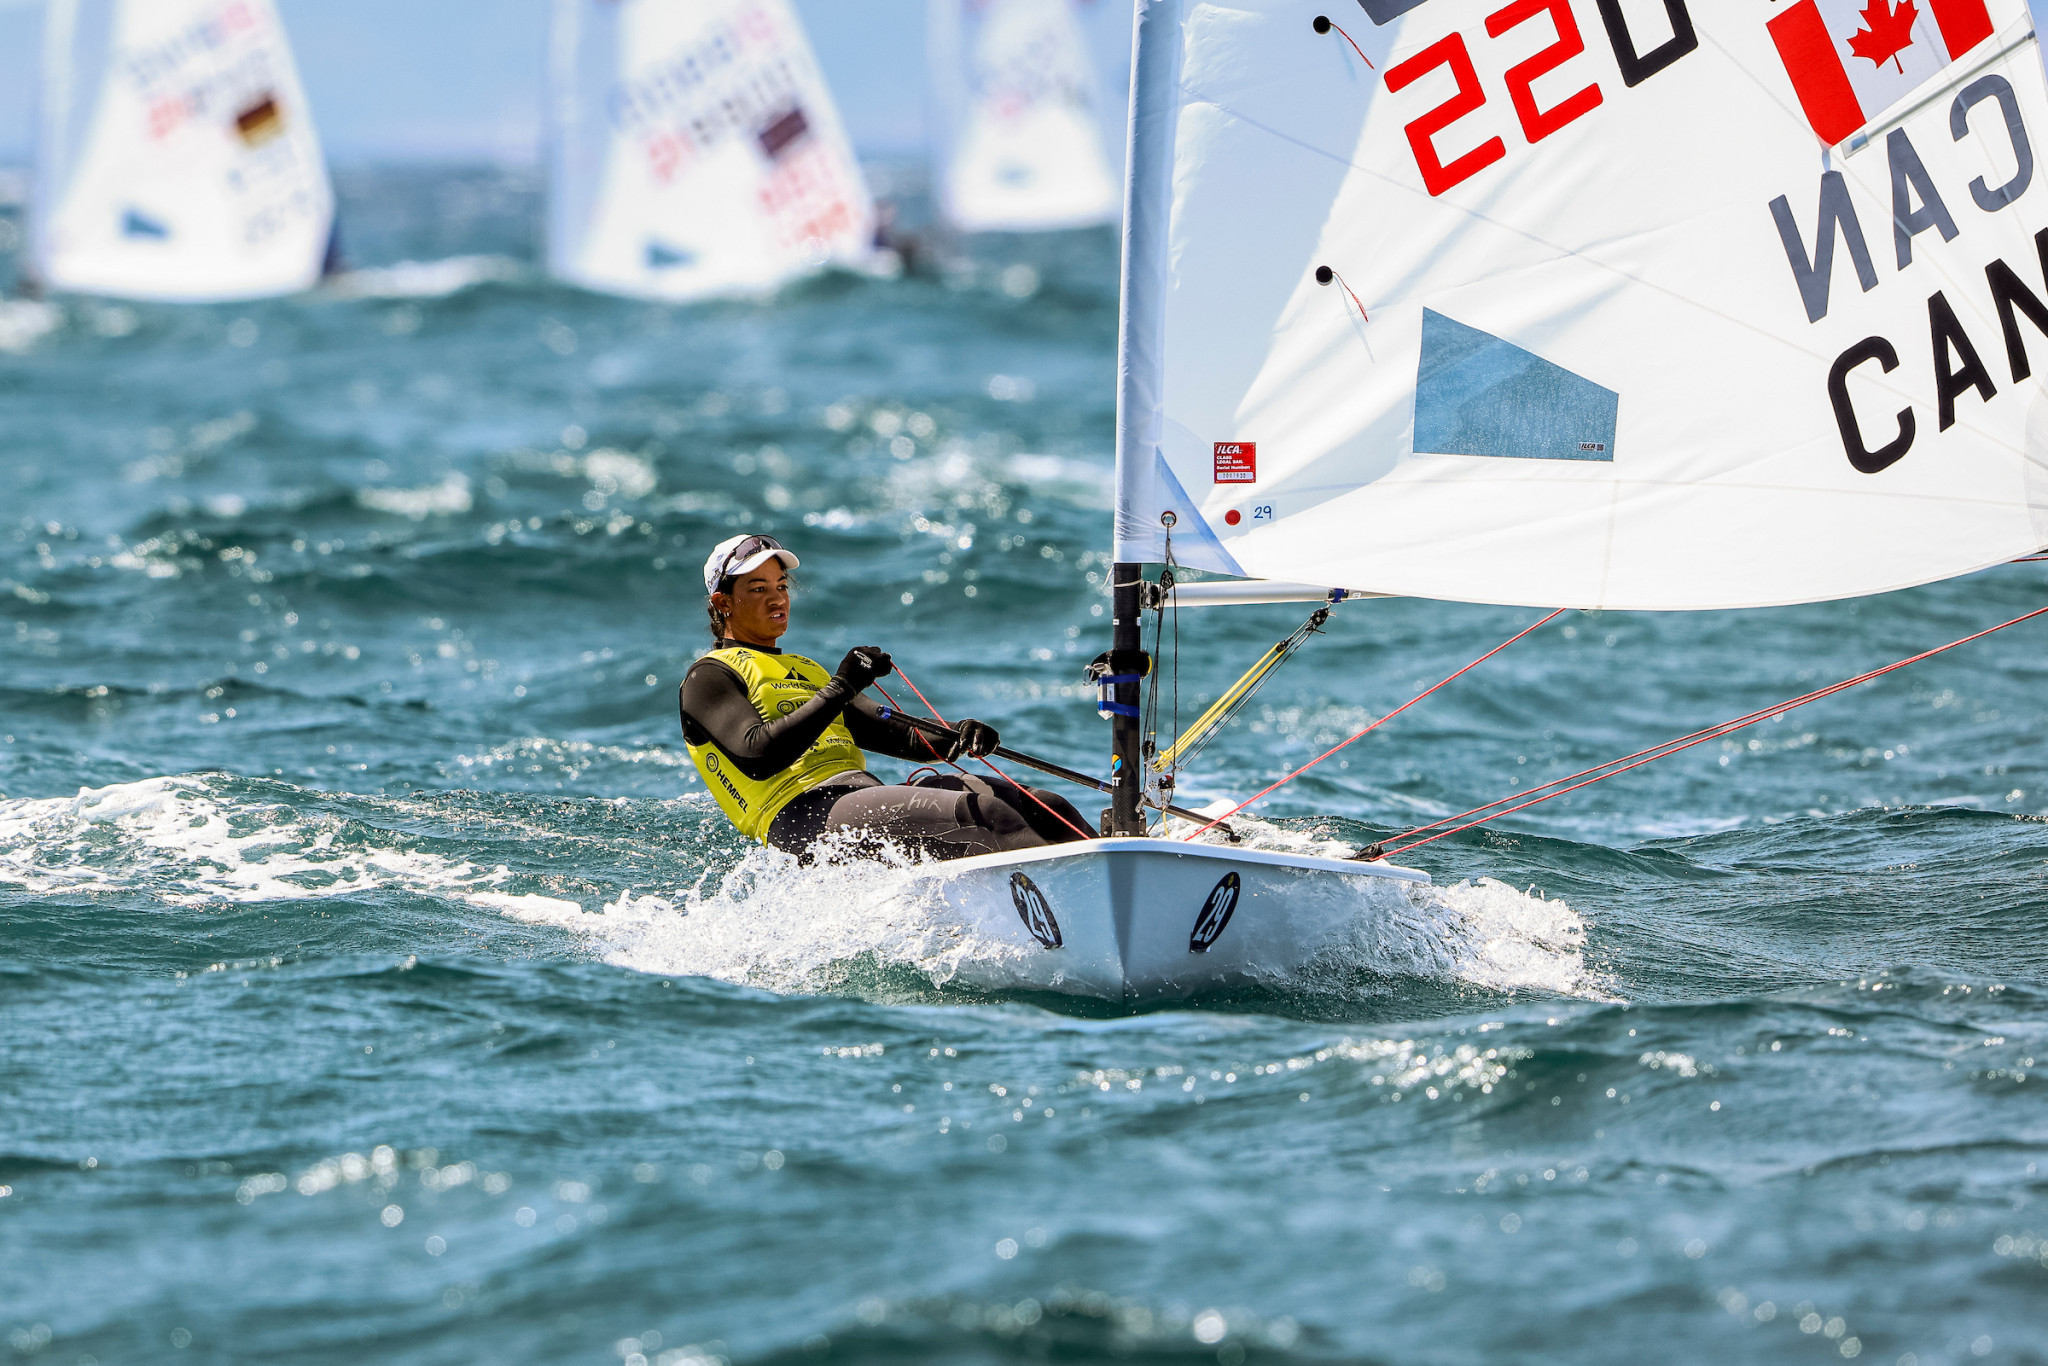 Sarah Douglas has already won the ILCA6 class with one day remaining ©World Sailing